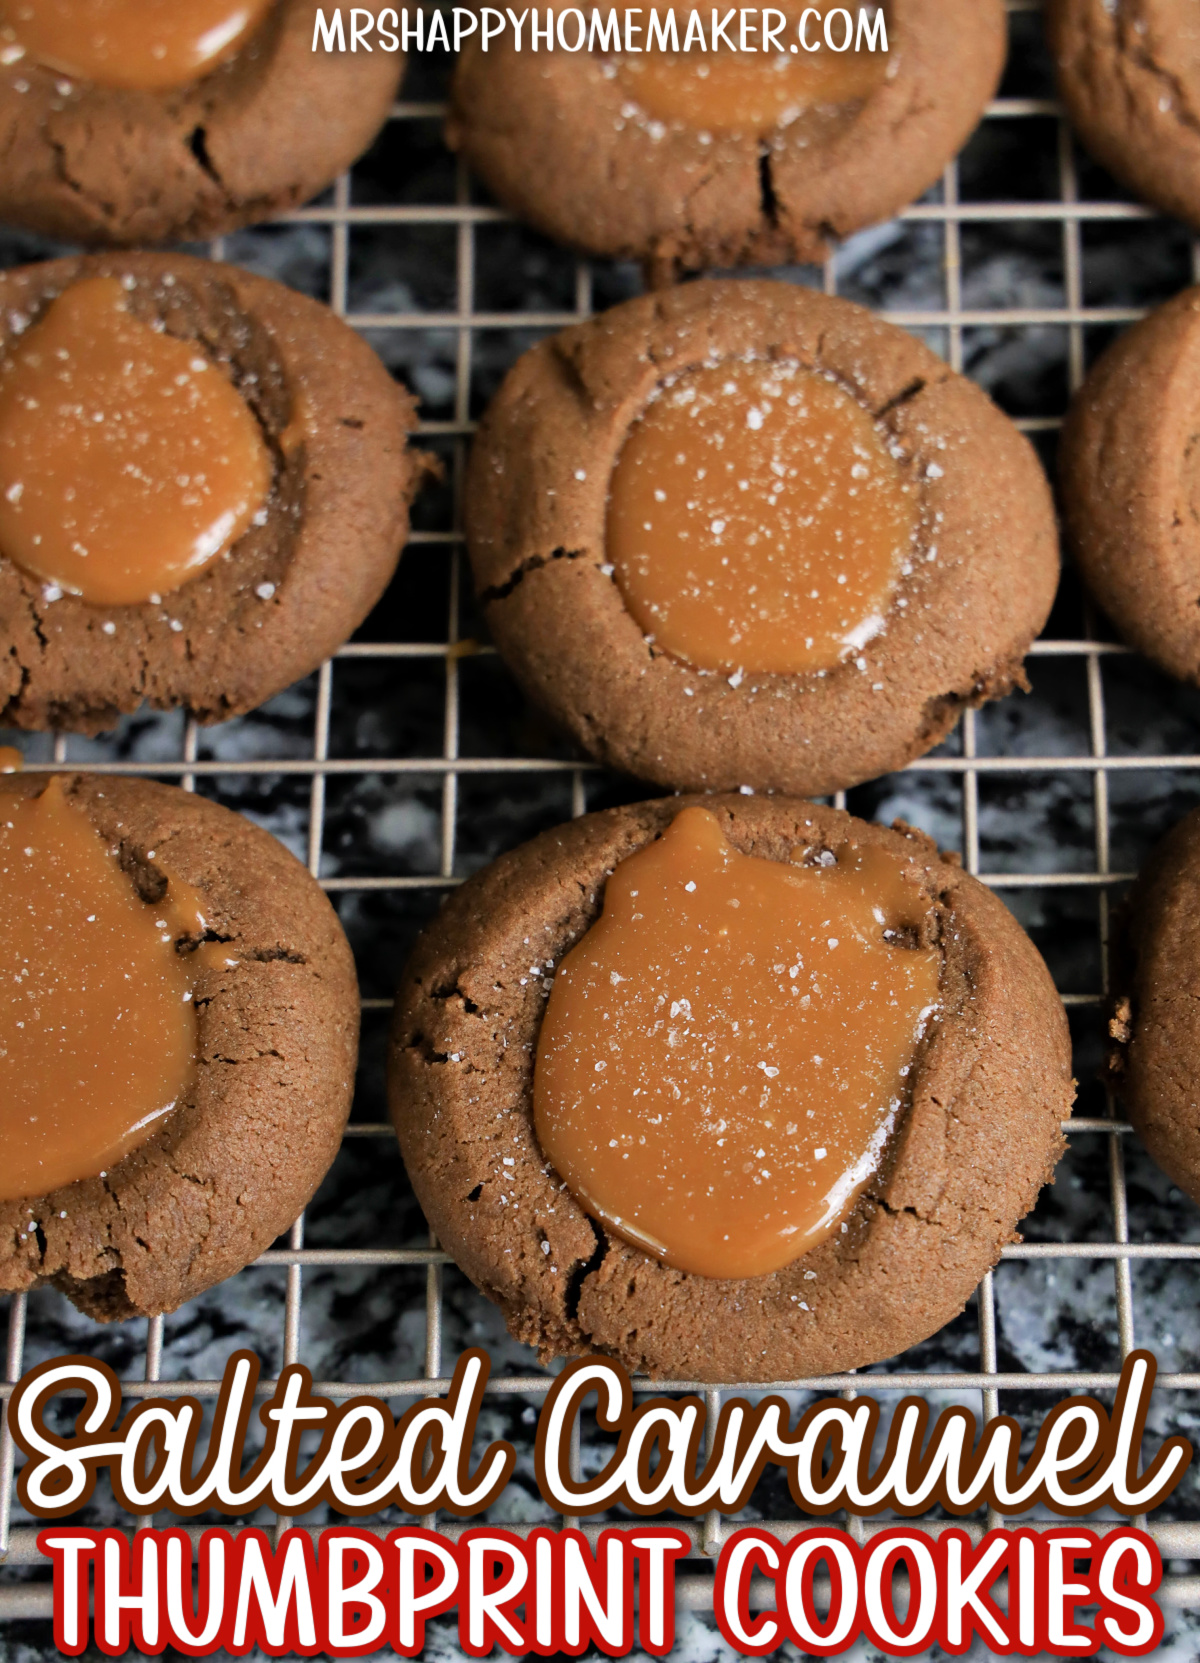 Salted caramel thumbprint cookies on a wire rack